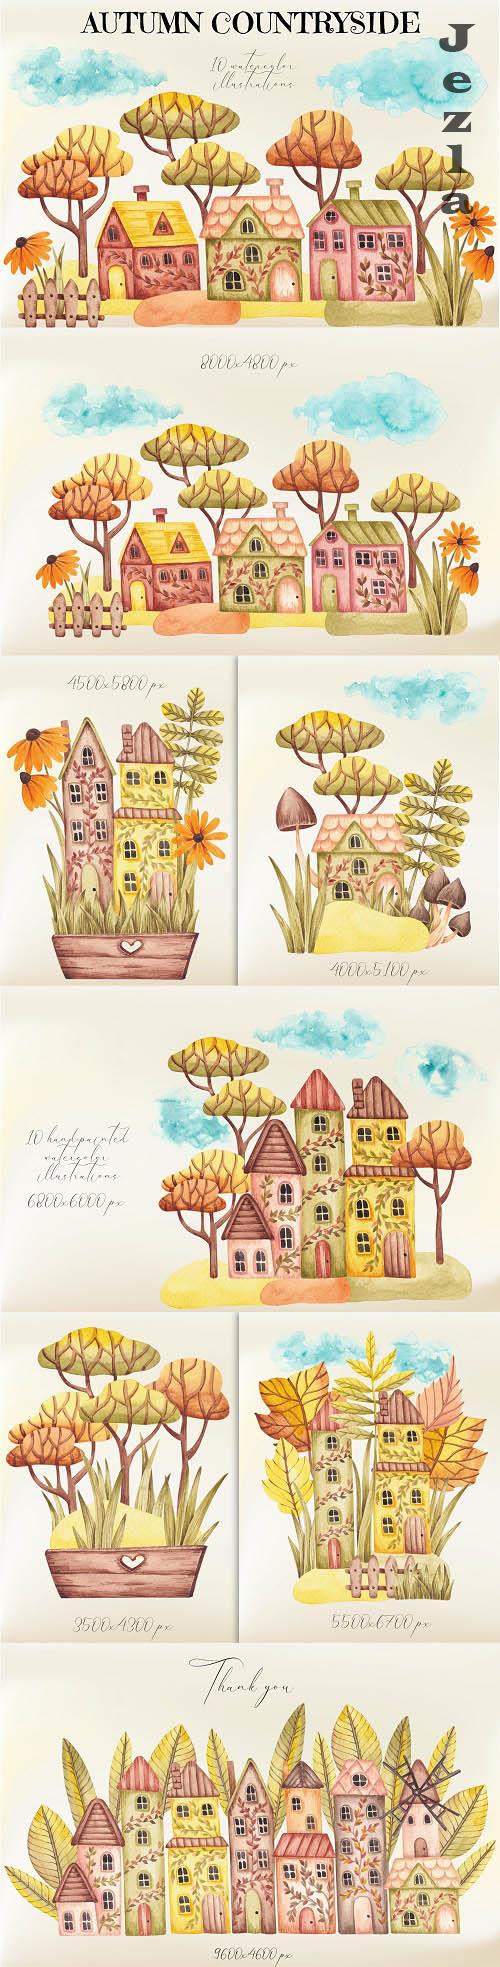 Watercolor Illustrations Autumn Countryside - 1506889